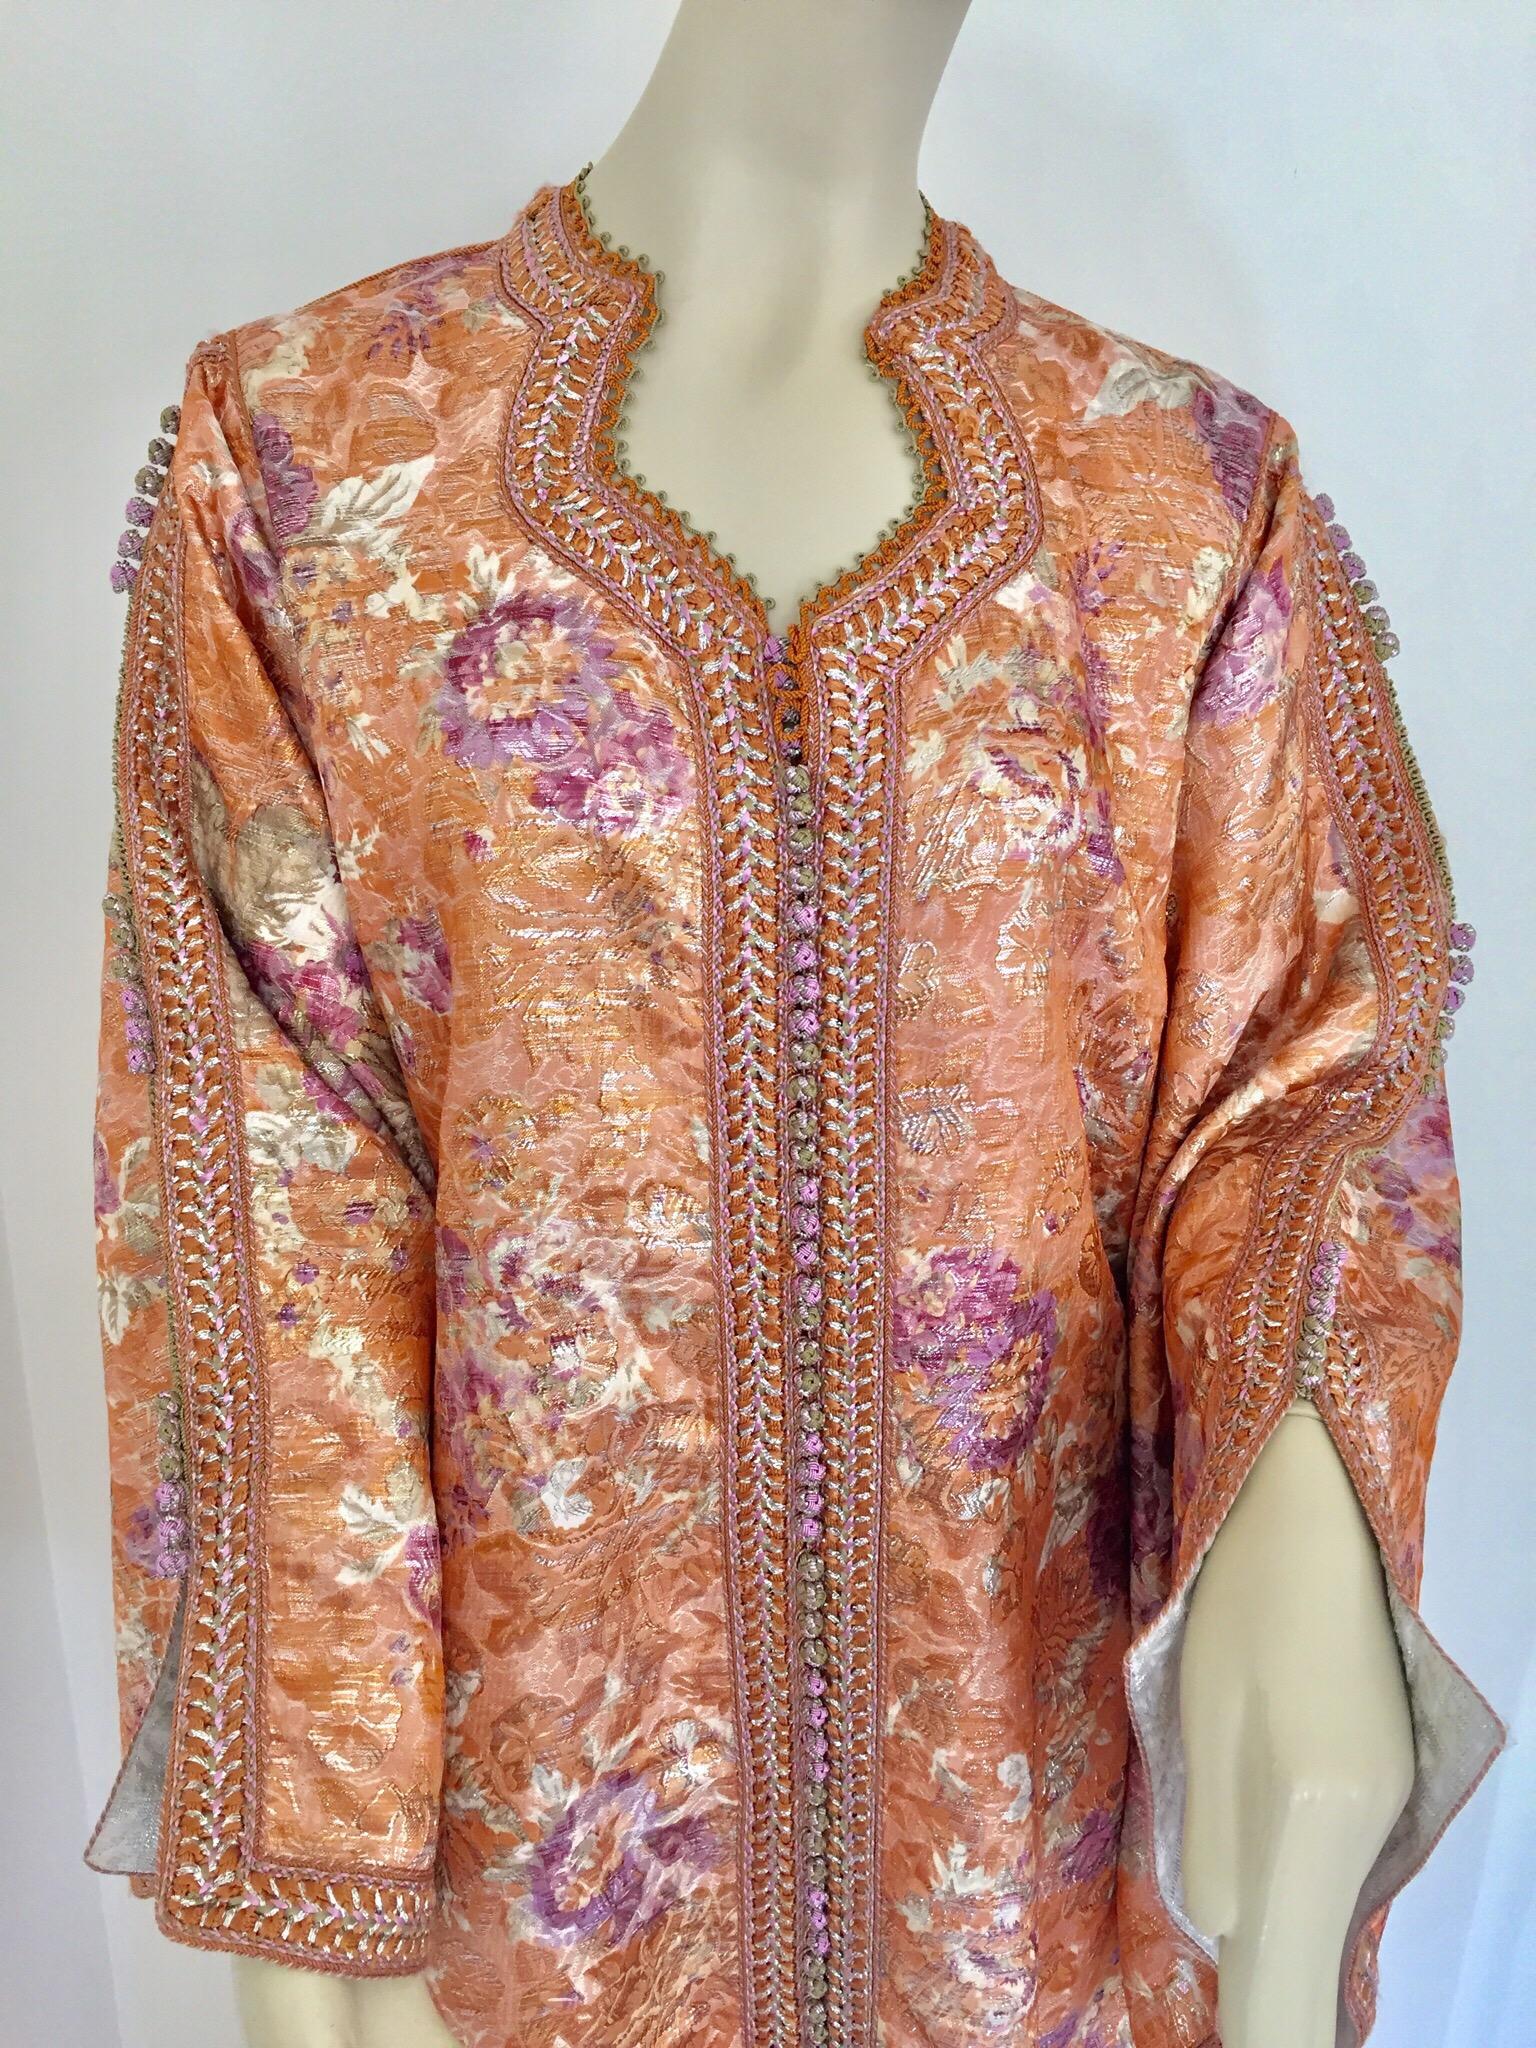 Moroccan Kaftan Orange and Purple Floral with Gold Embroidered Maxi Dress Caftan For Sale 7